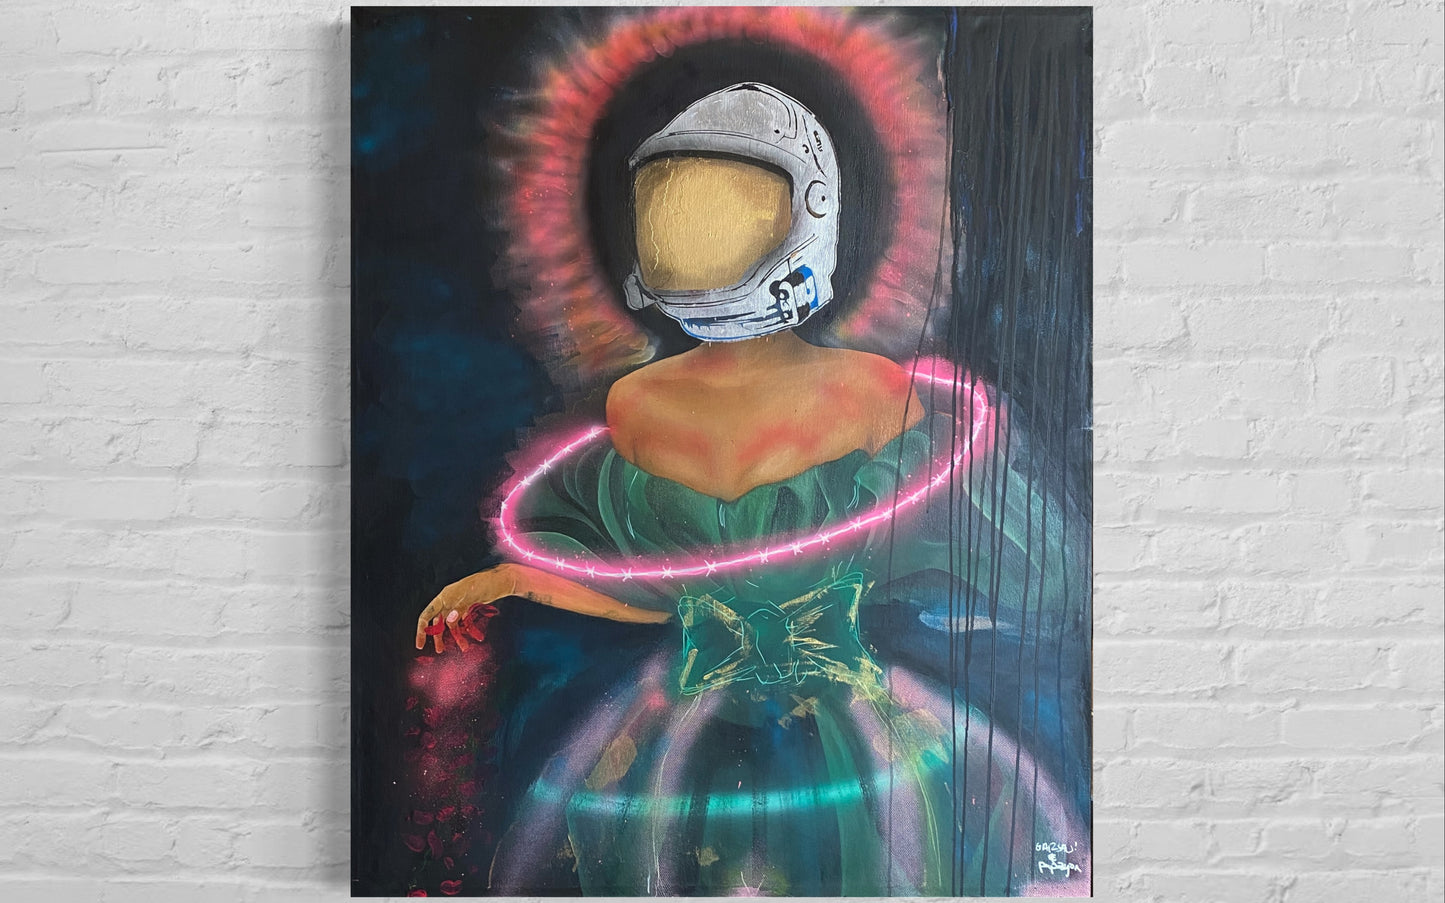 "I need space" Canvas